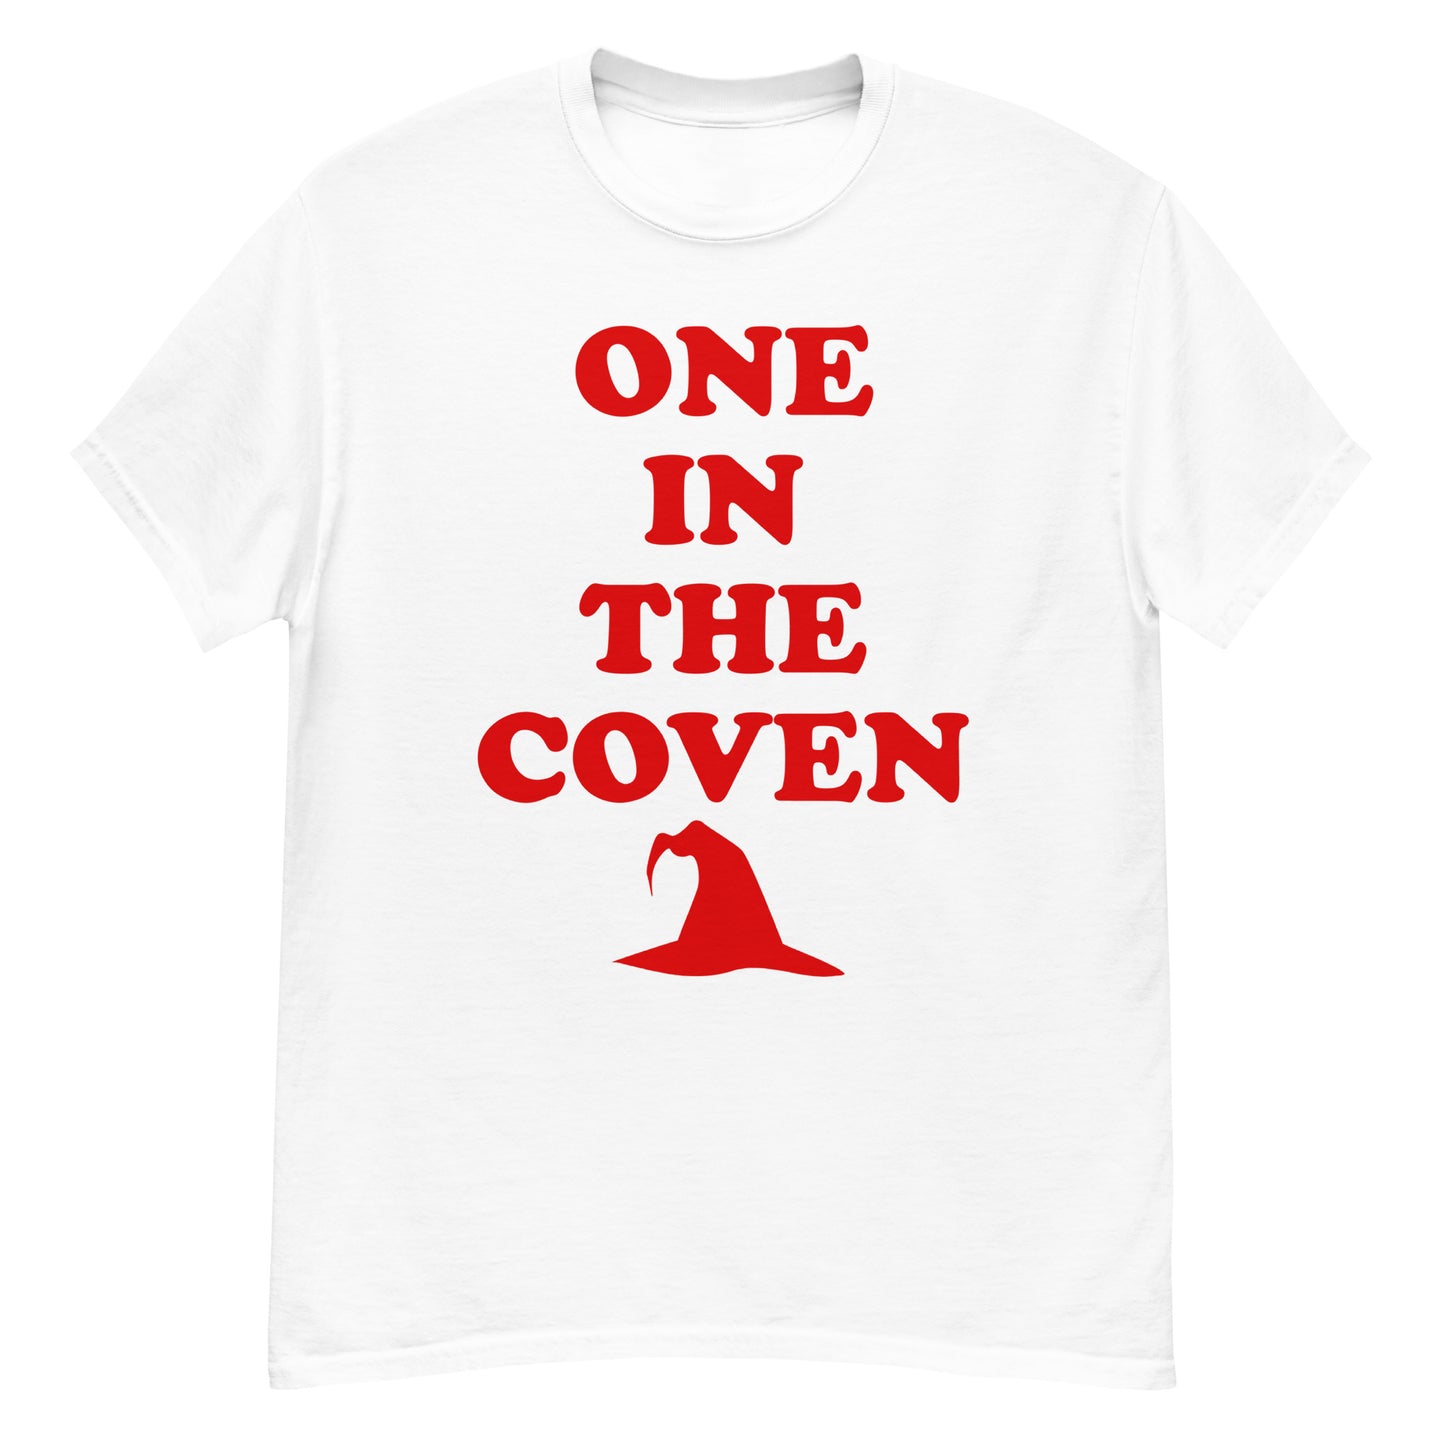 One in the Coven t-shirt